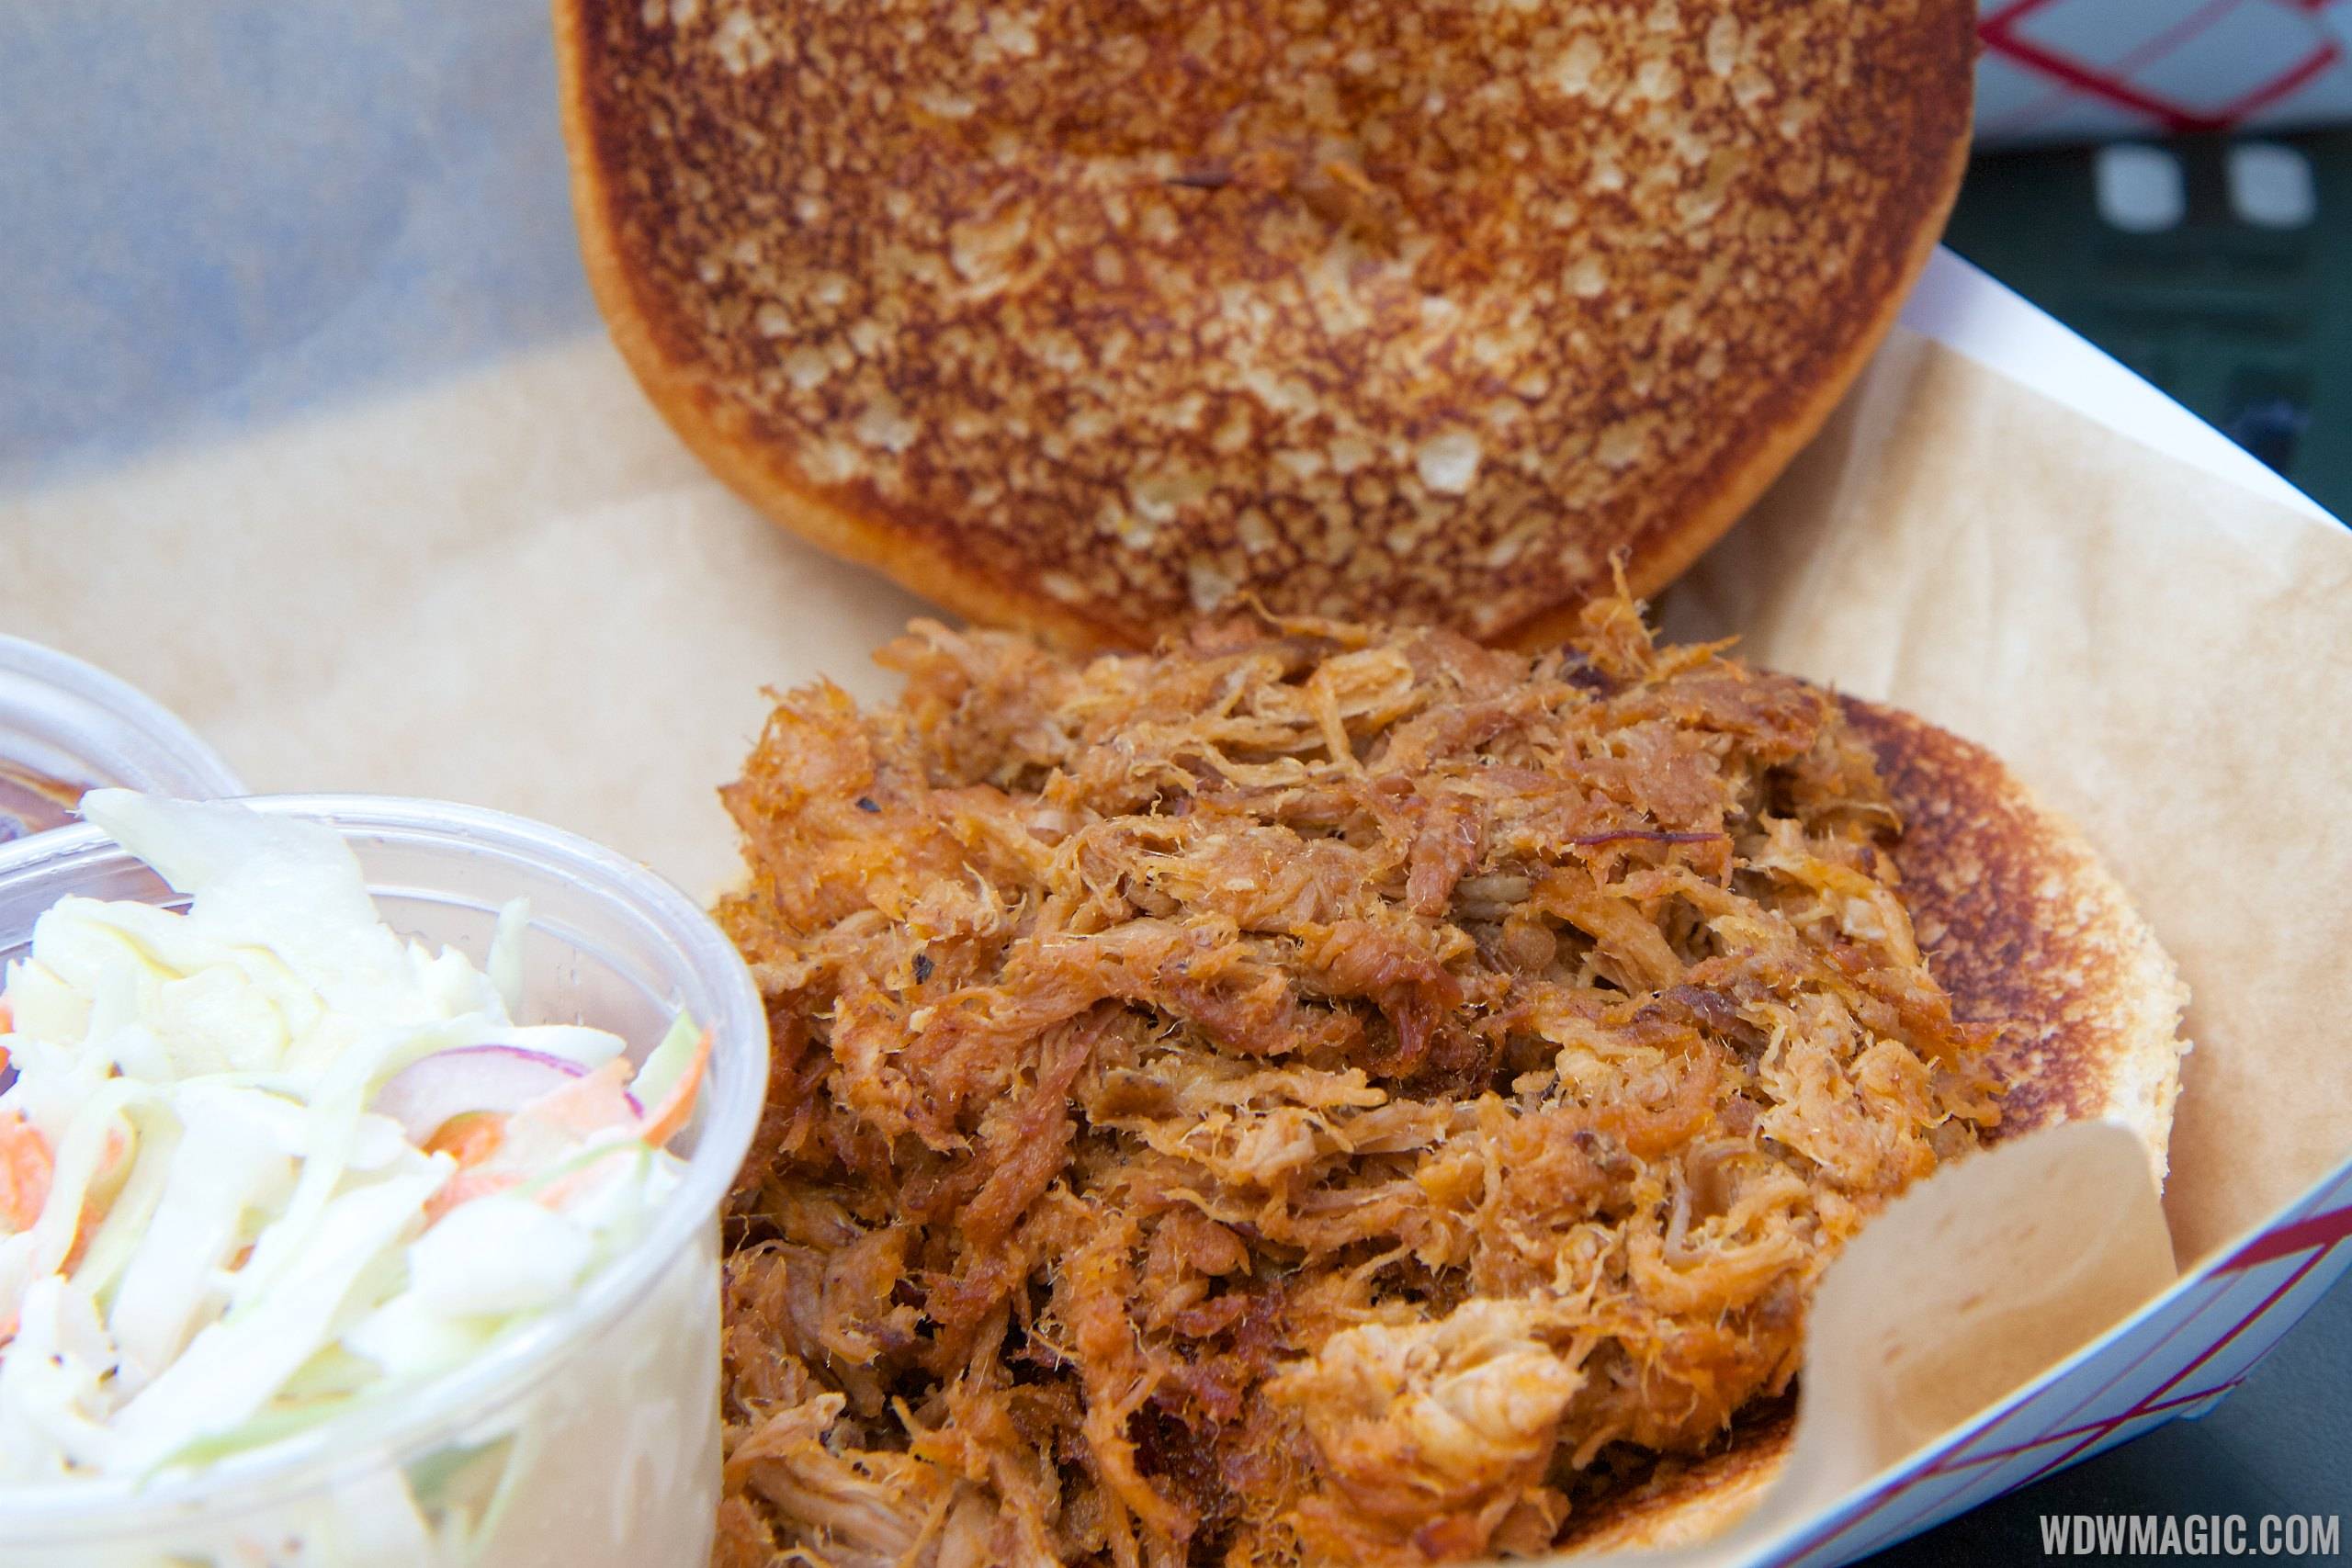 The Smokehouse - Pulled pork sandwich